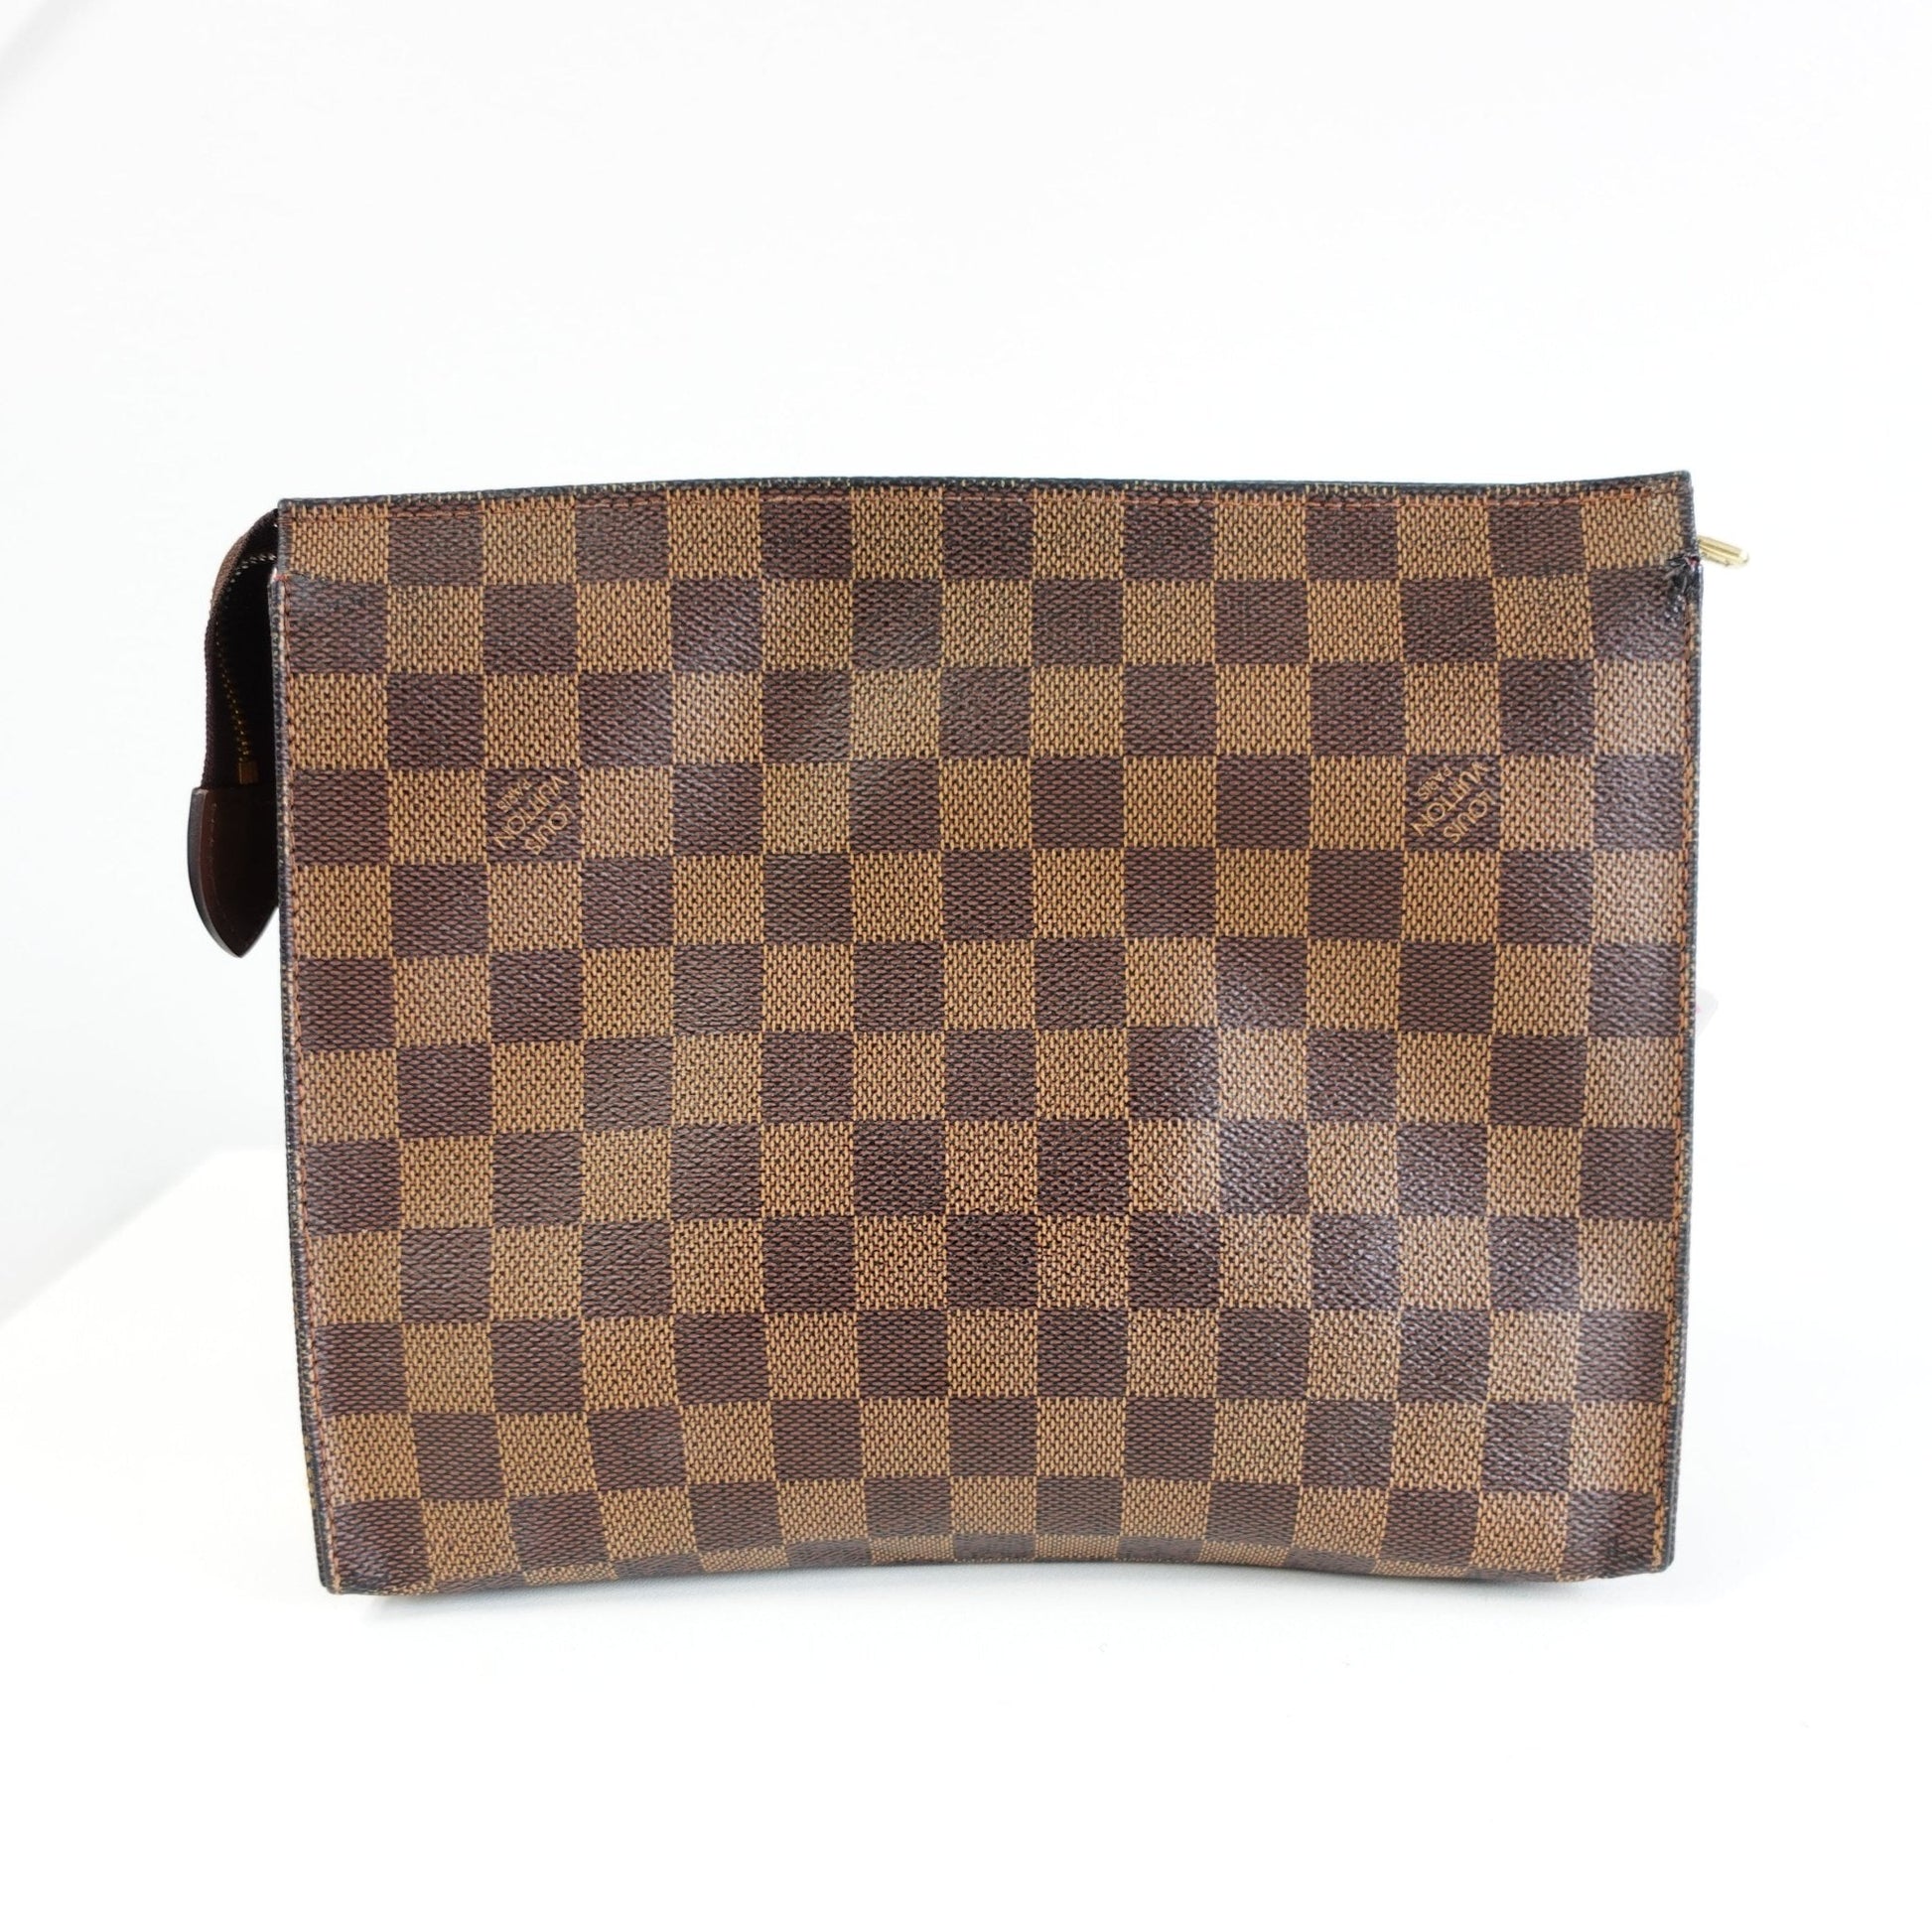 LOUIS VUITTON Damier Ebene Poche 26 with Unbranded Insert and Chain - Bag Envy